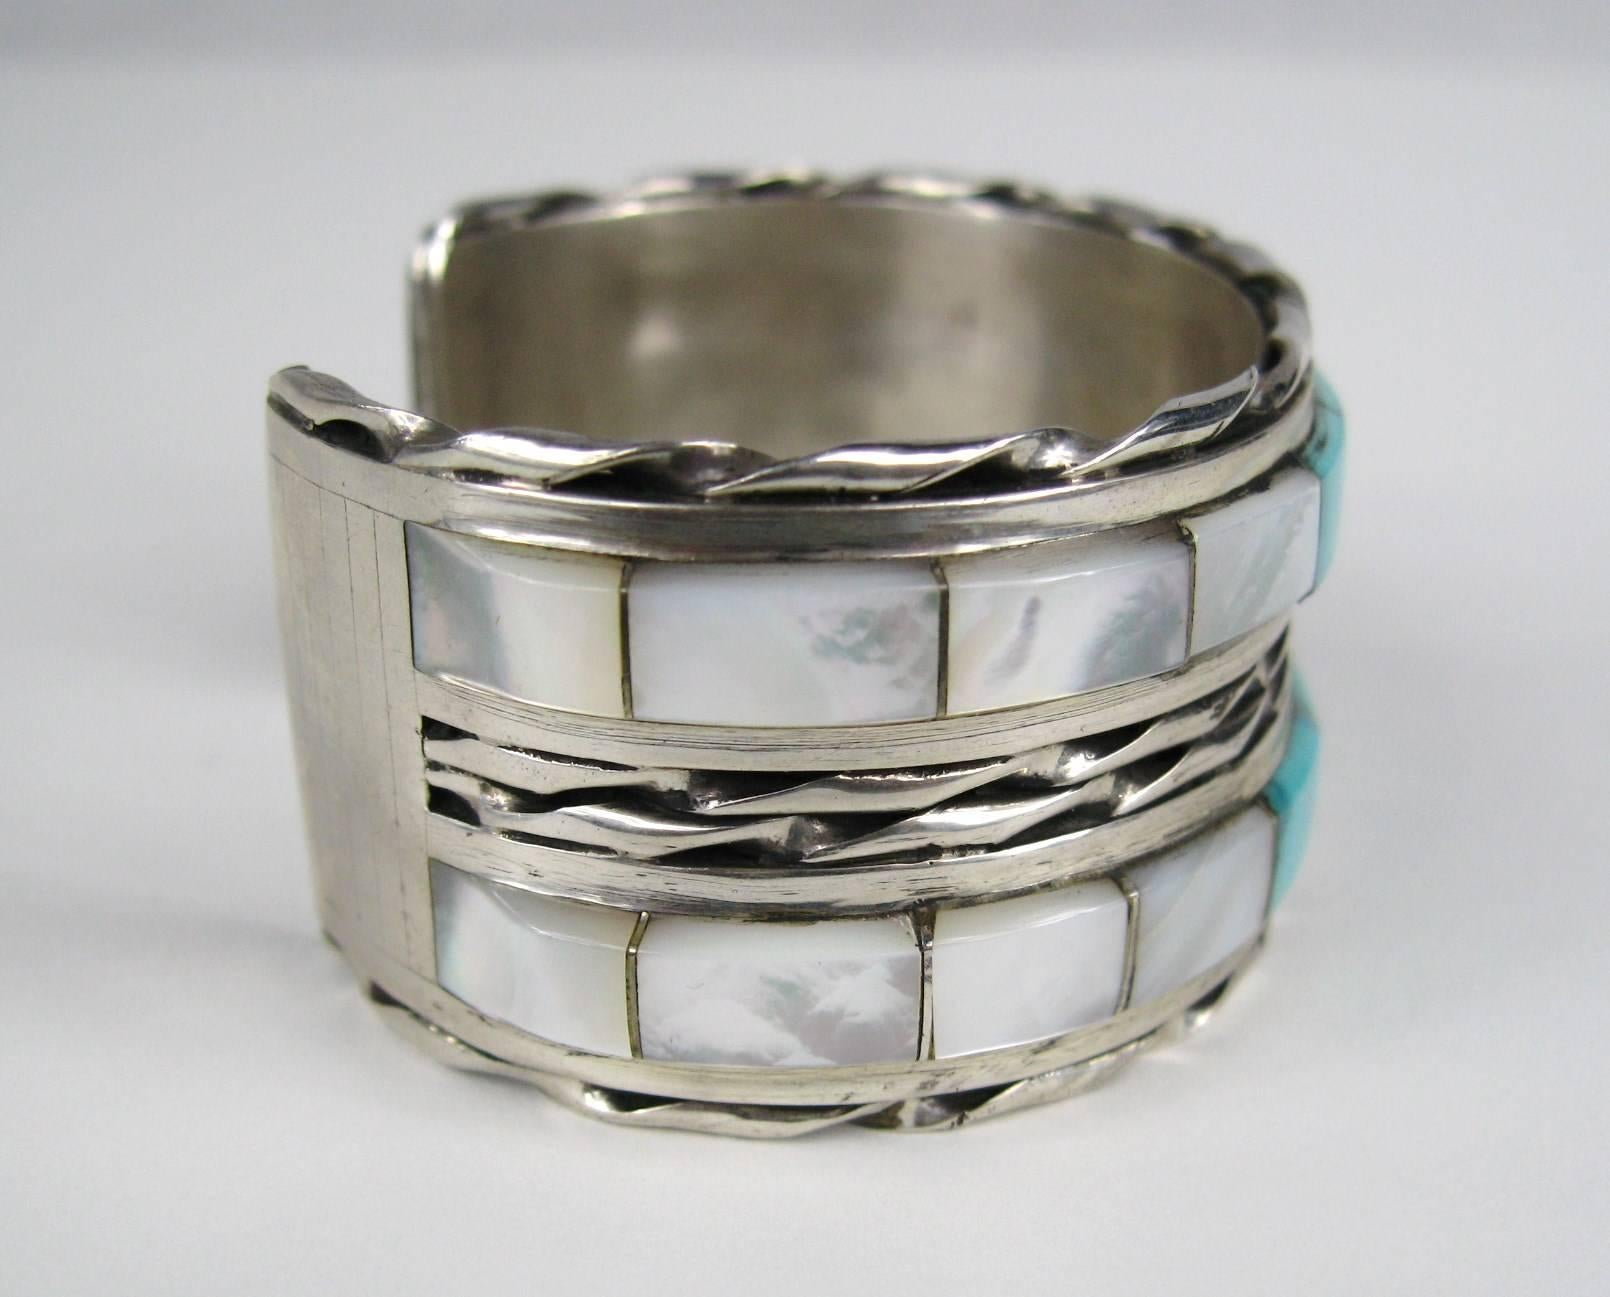 Double Row Inlaid Turquoise and Mother of pearl Bracelet. Measuring Hallmarked MTPANTEAH...1.15 in wide ...1.15 in opening on the back 
will fit 6.5 to 7 in wrist nicely. This piece is clean, clear, bright, precise, extraordinarily well-made, and